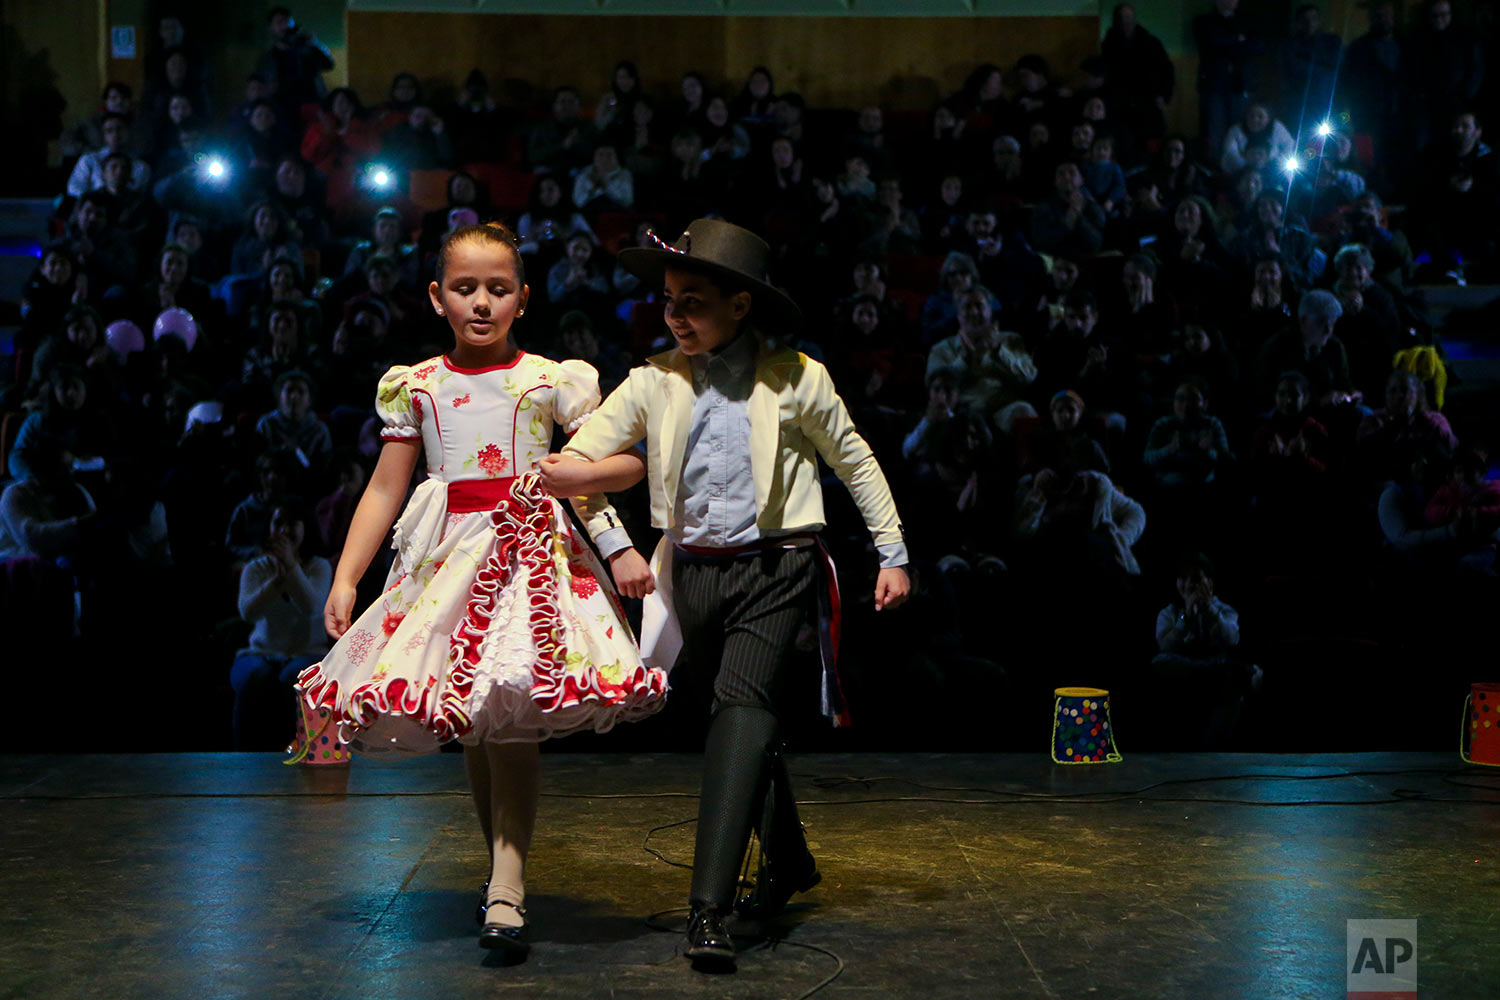  In this Aug. 19, 2017 photo, transgender children, Selenna, 8, and Kevin, 12, perform in traditional Chilean outfits at an event celebrating Transgender Children Day in Santiago, Chile. An appellate court in Santiago accepted in June a transgender a